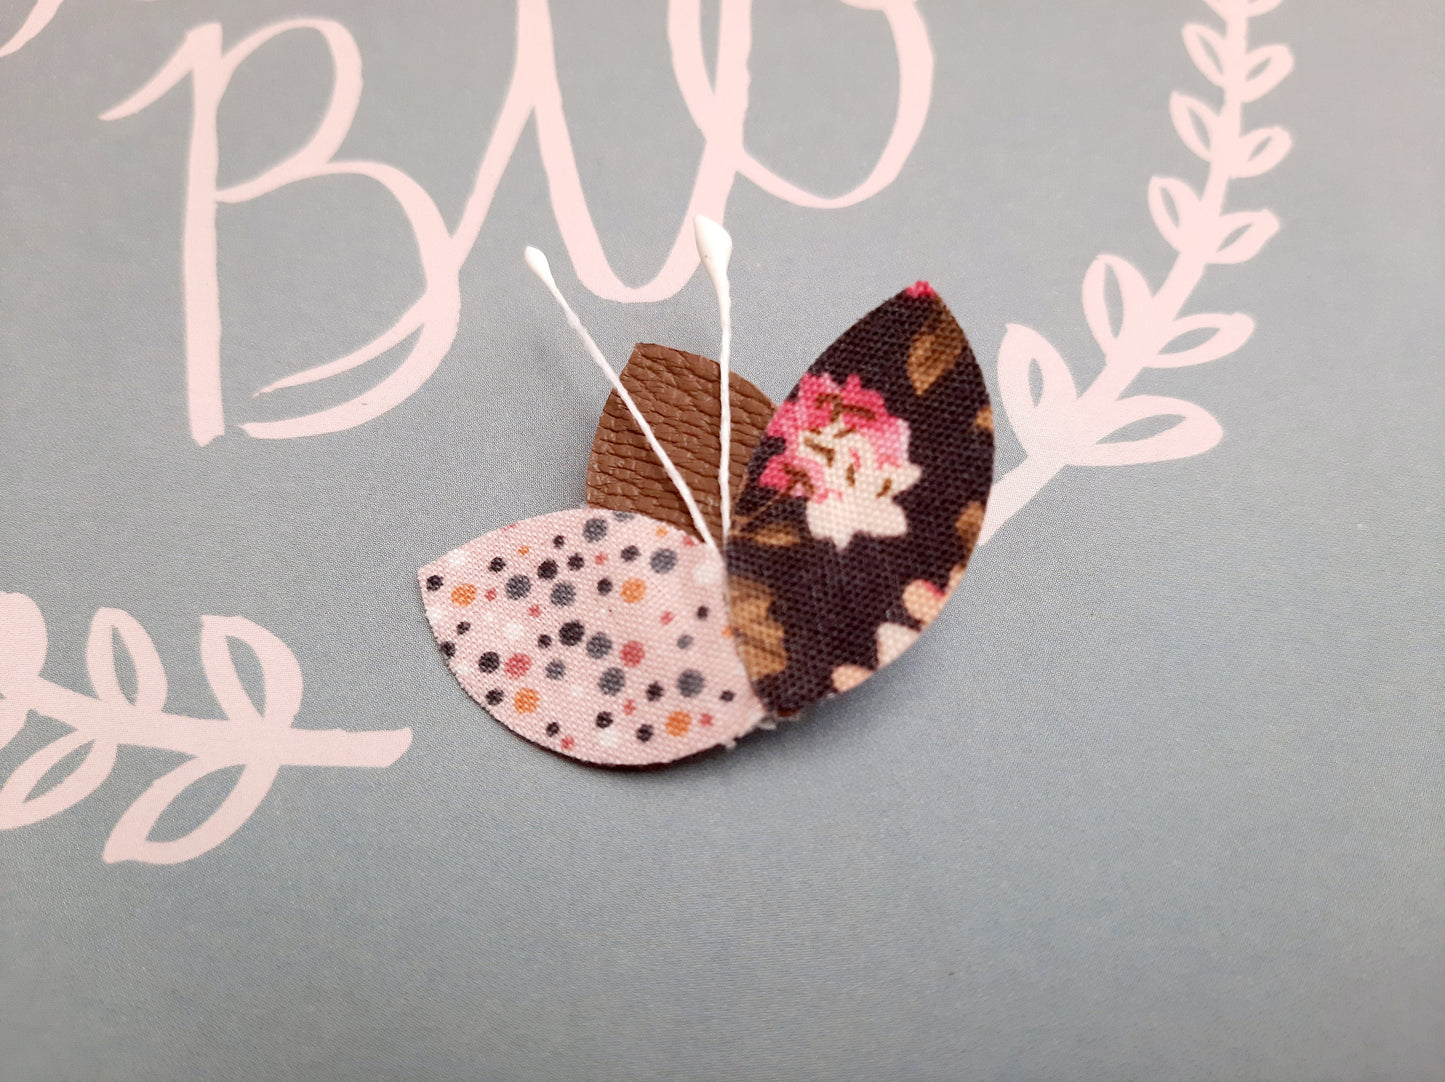 Brooch petals of leather and fabric flowers polka dots lotus, woman gift, birthday, wedding, bride